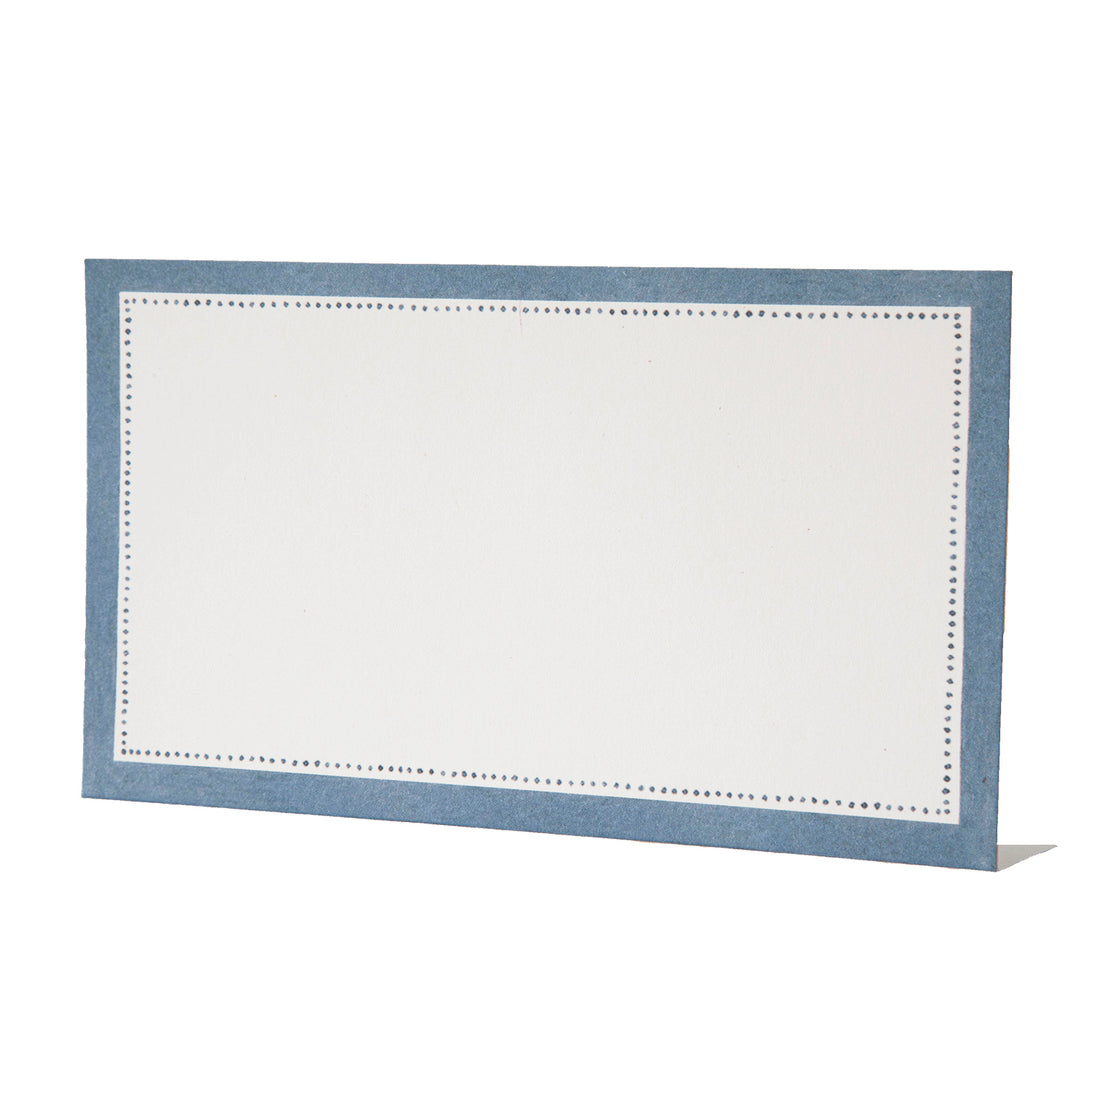 A free-standing, rectangular white table card with a medium blue frame around the edges, accented with a row on small blue dots just inside the frame.